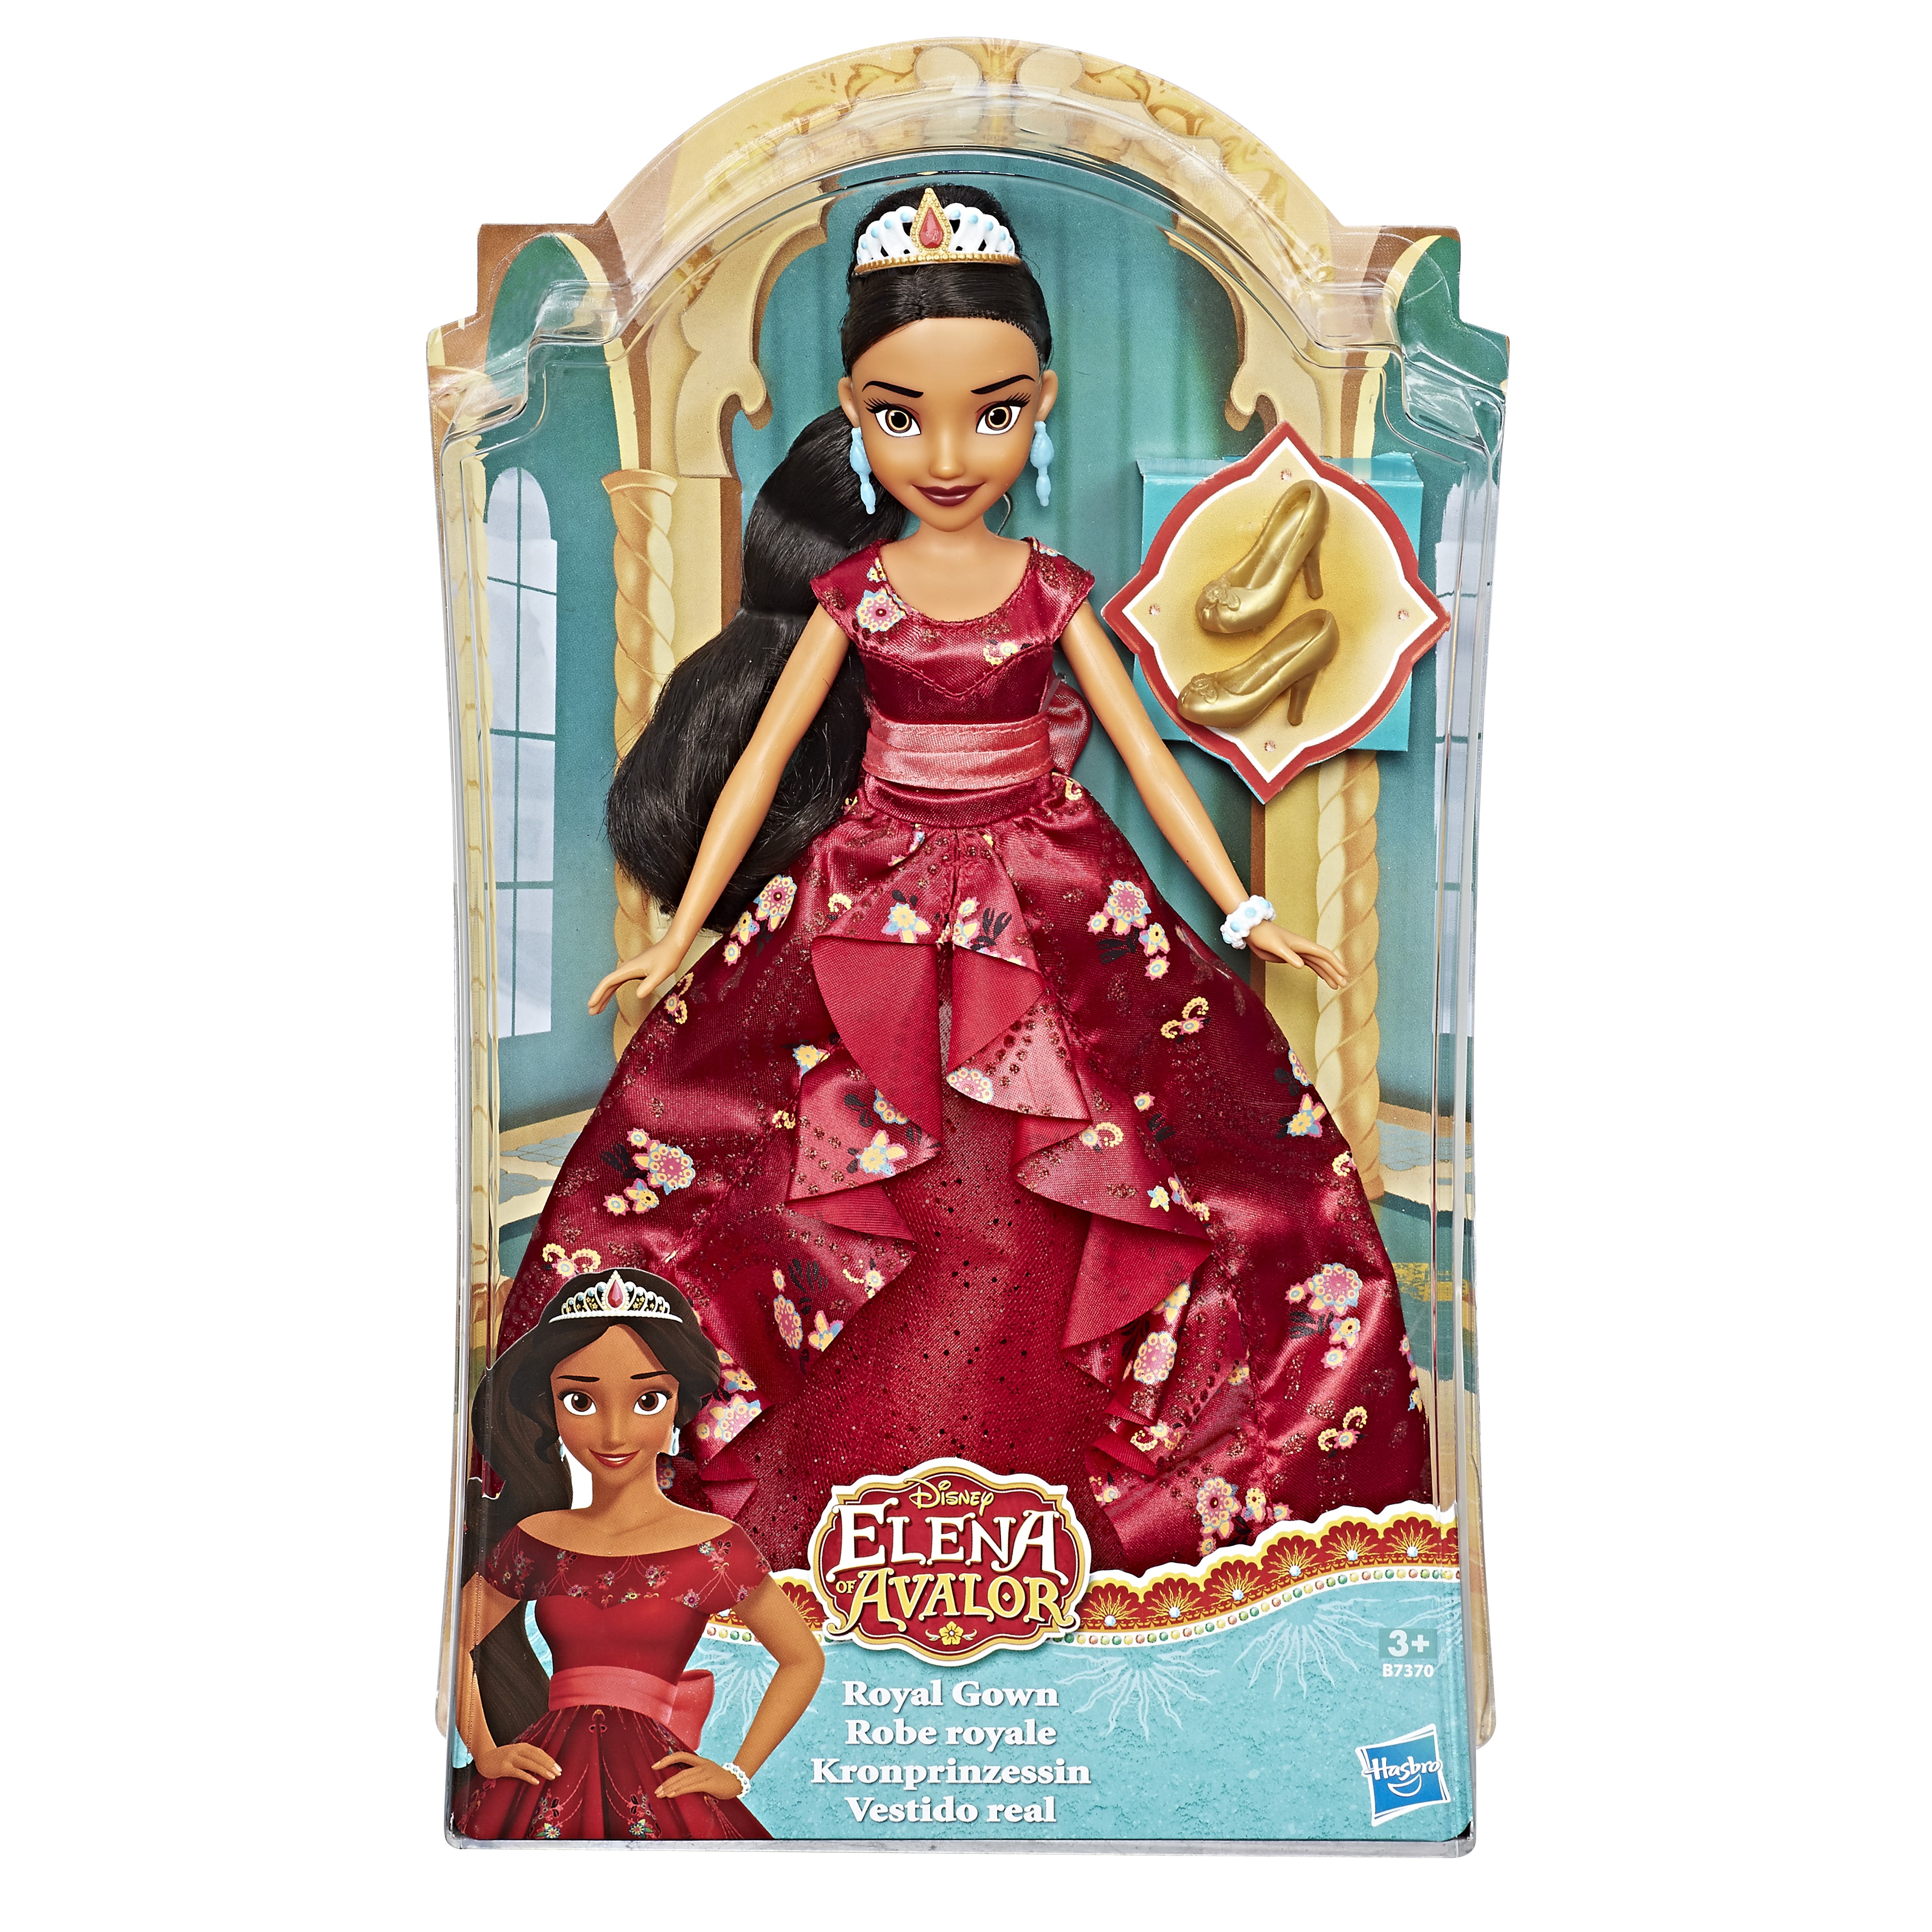 Win 1 of 2 Elena of Avalor hampers